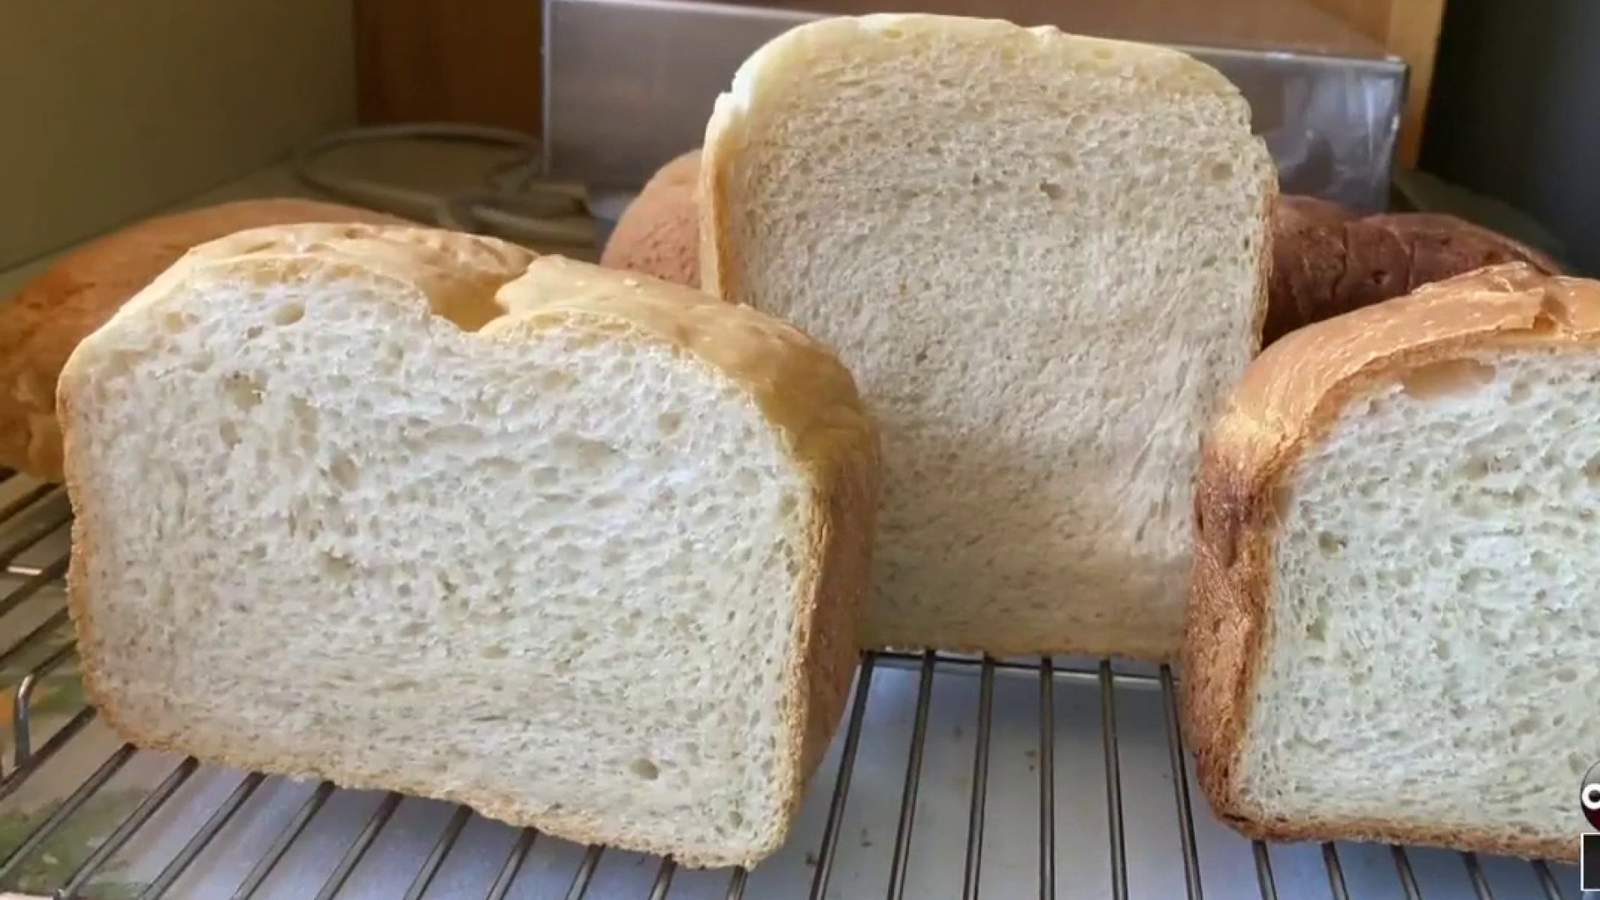 Looking for a new bread maker for the holidays? Check out these Consumer Reports picks